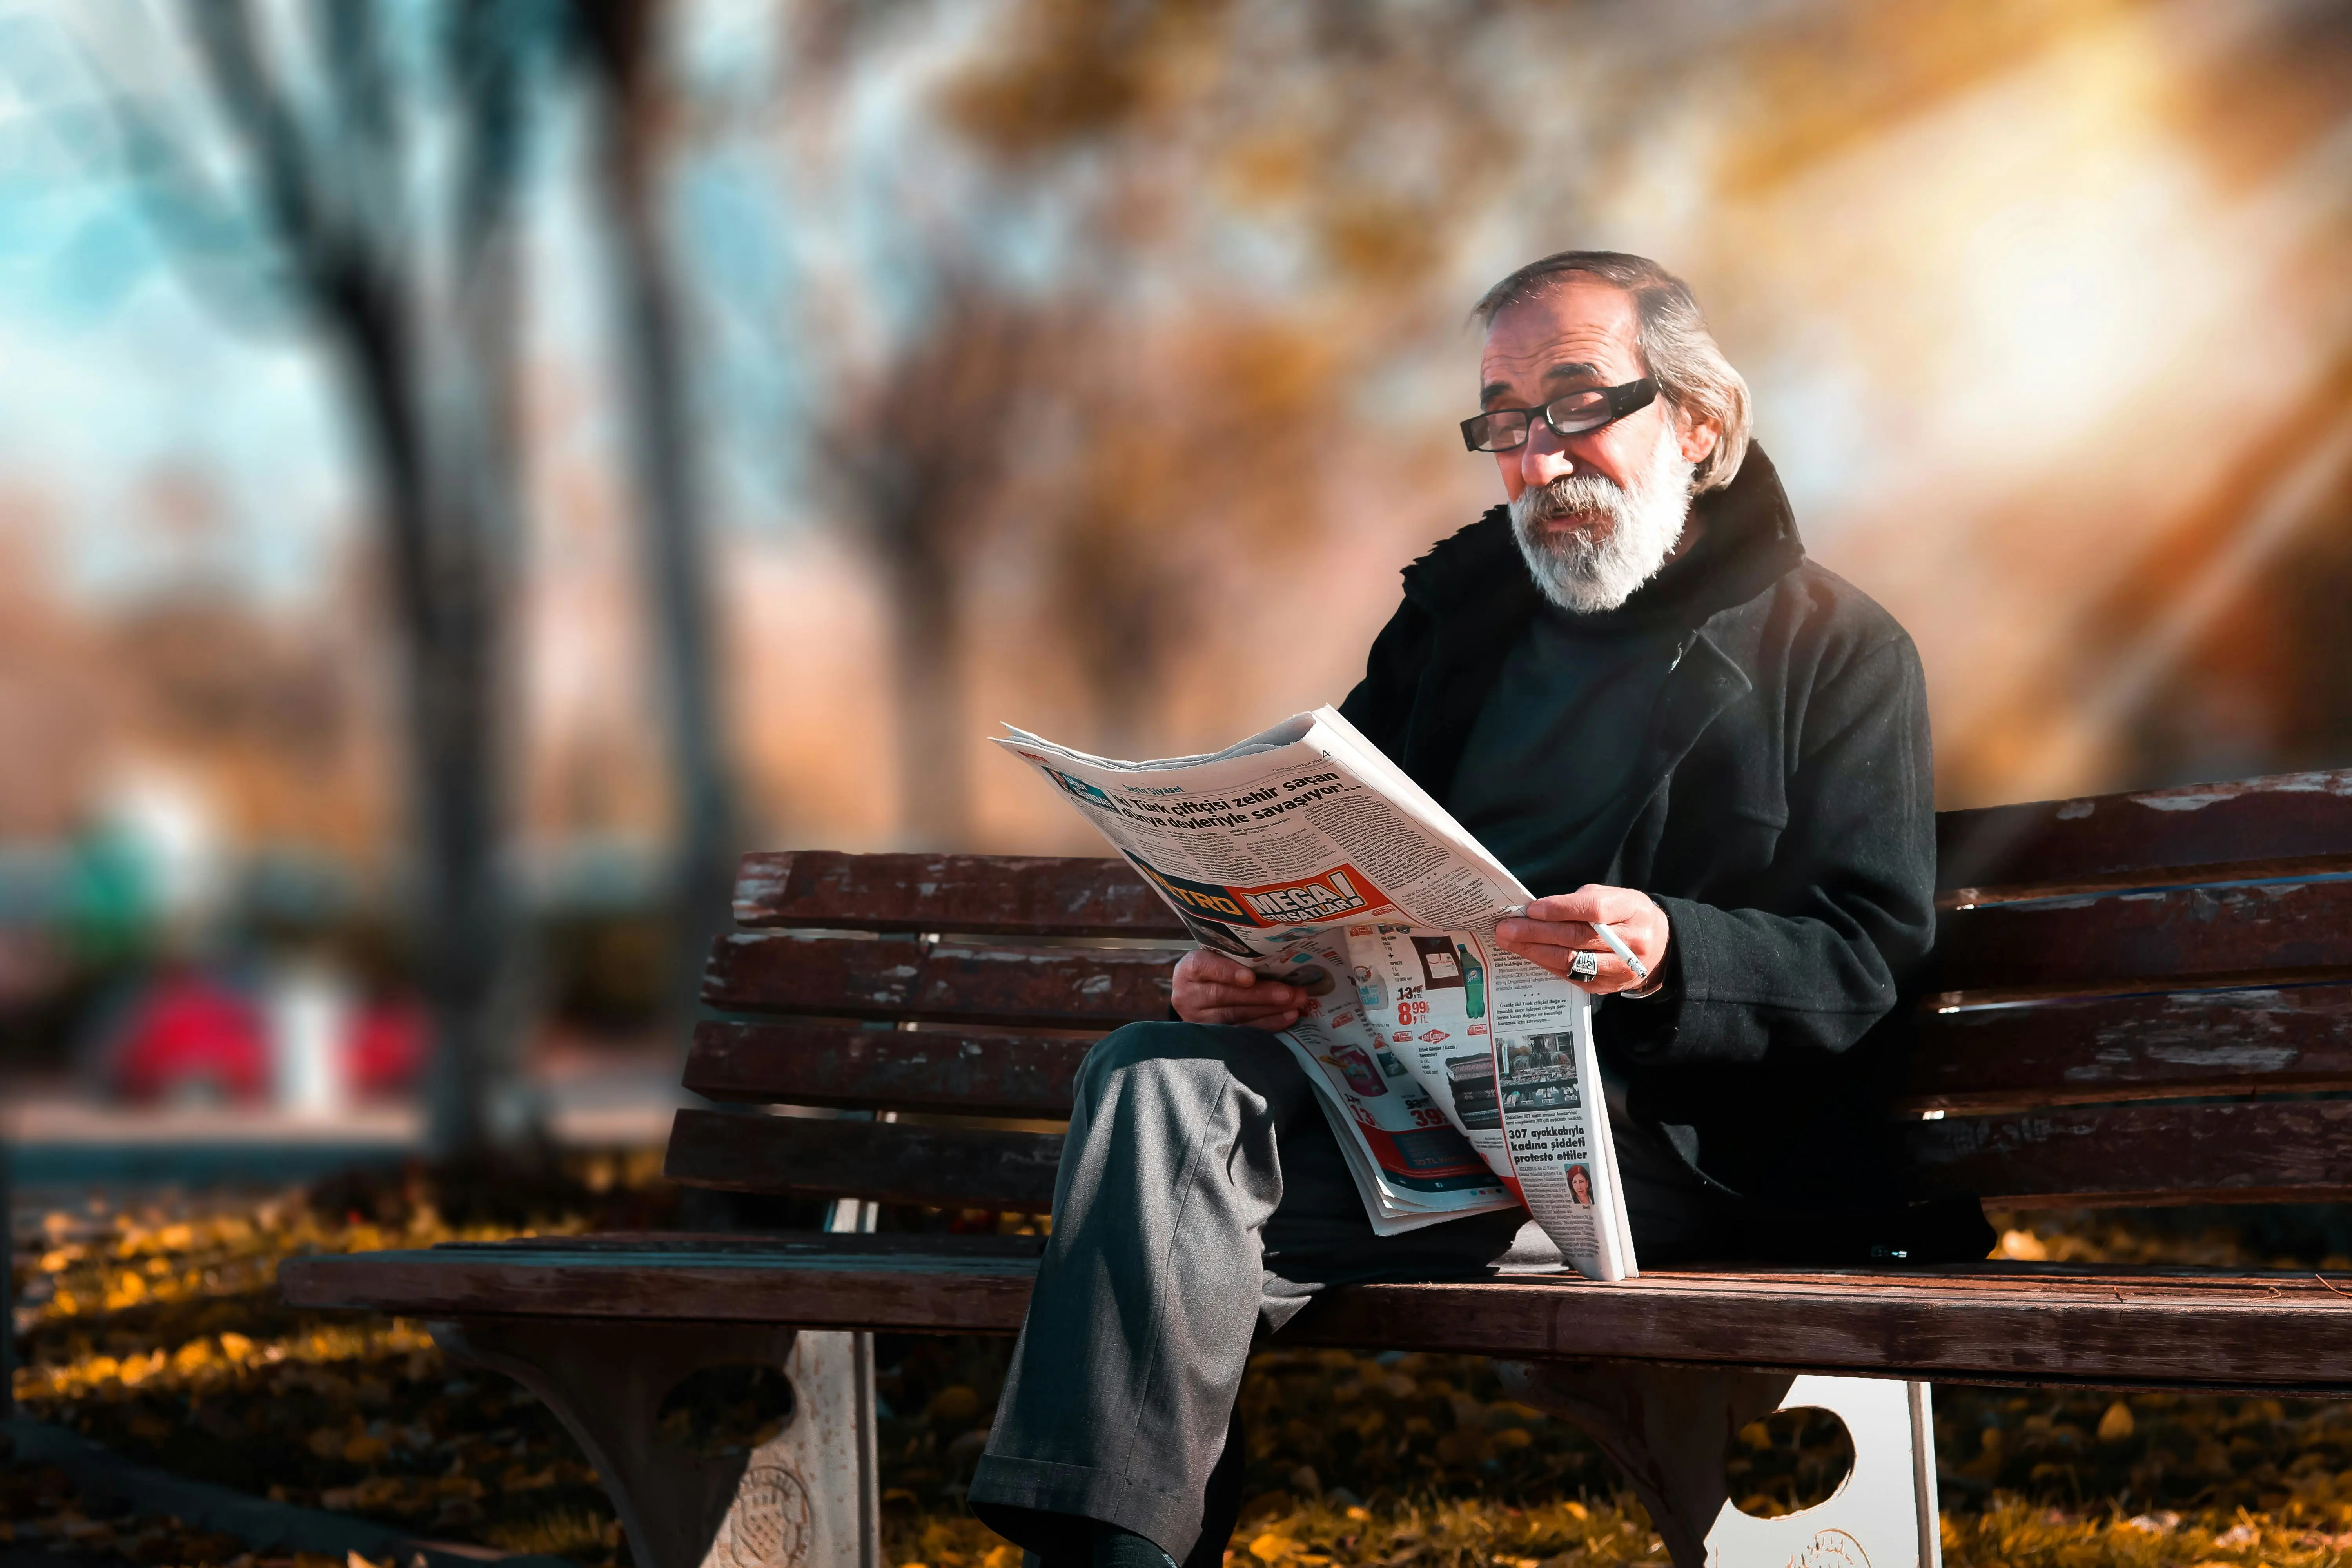 An elderly man sits on a bench reading the newspaper.